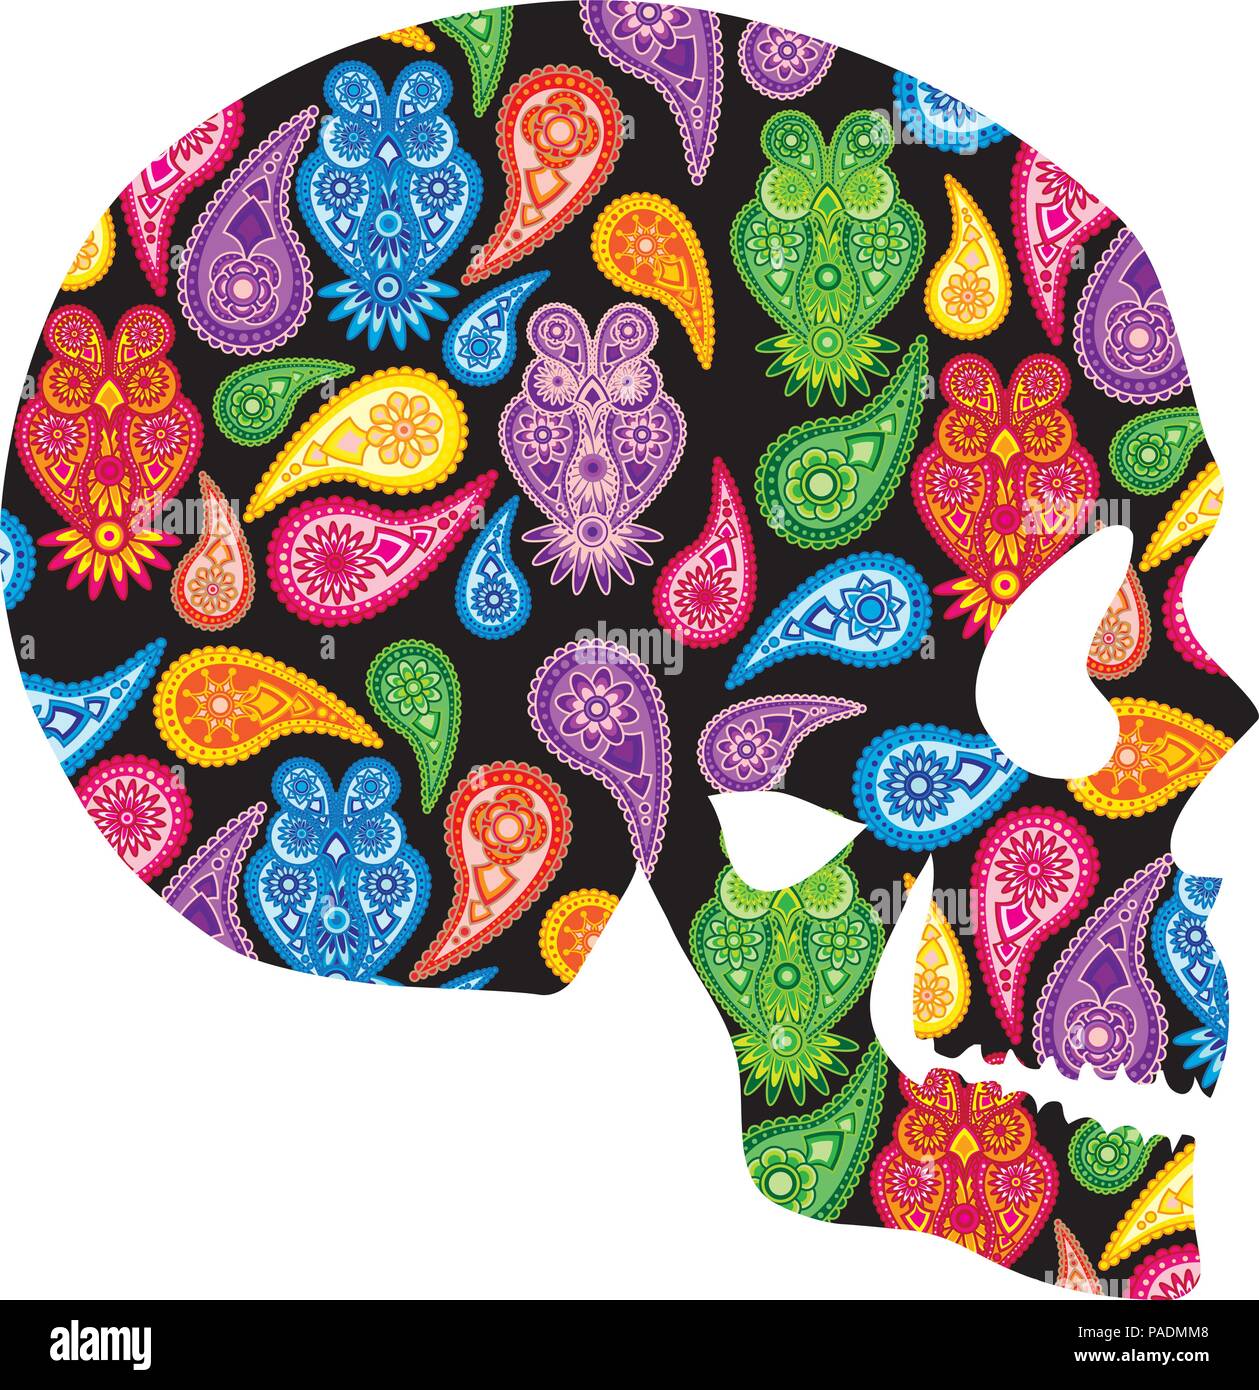 Human skull head silhouette with paisley floral owl colorful pattern illustration Stock Vector